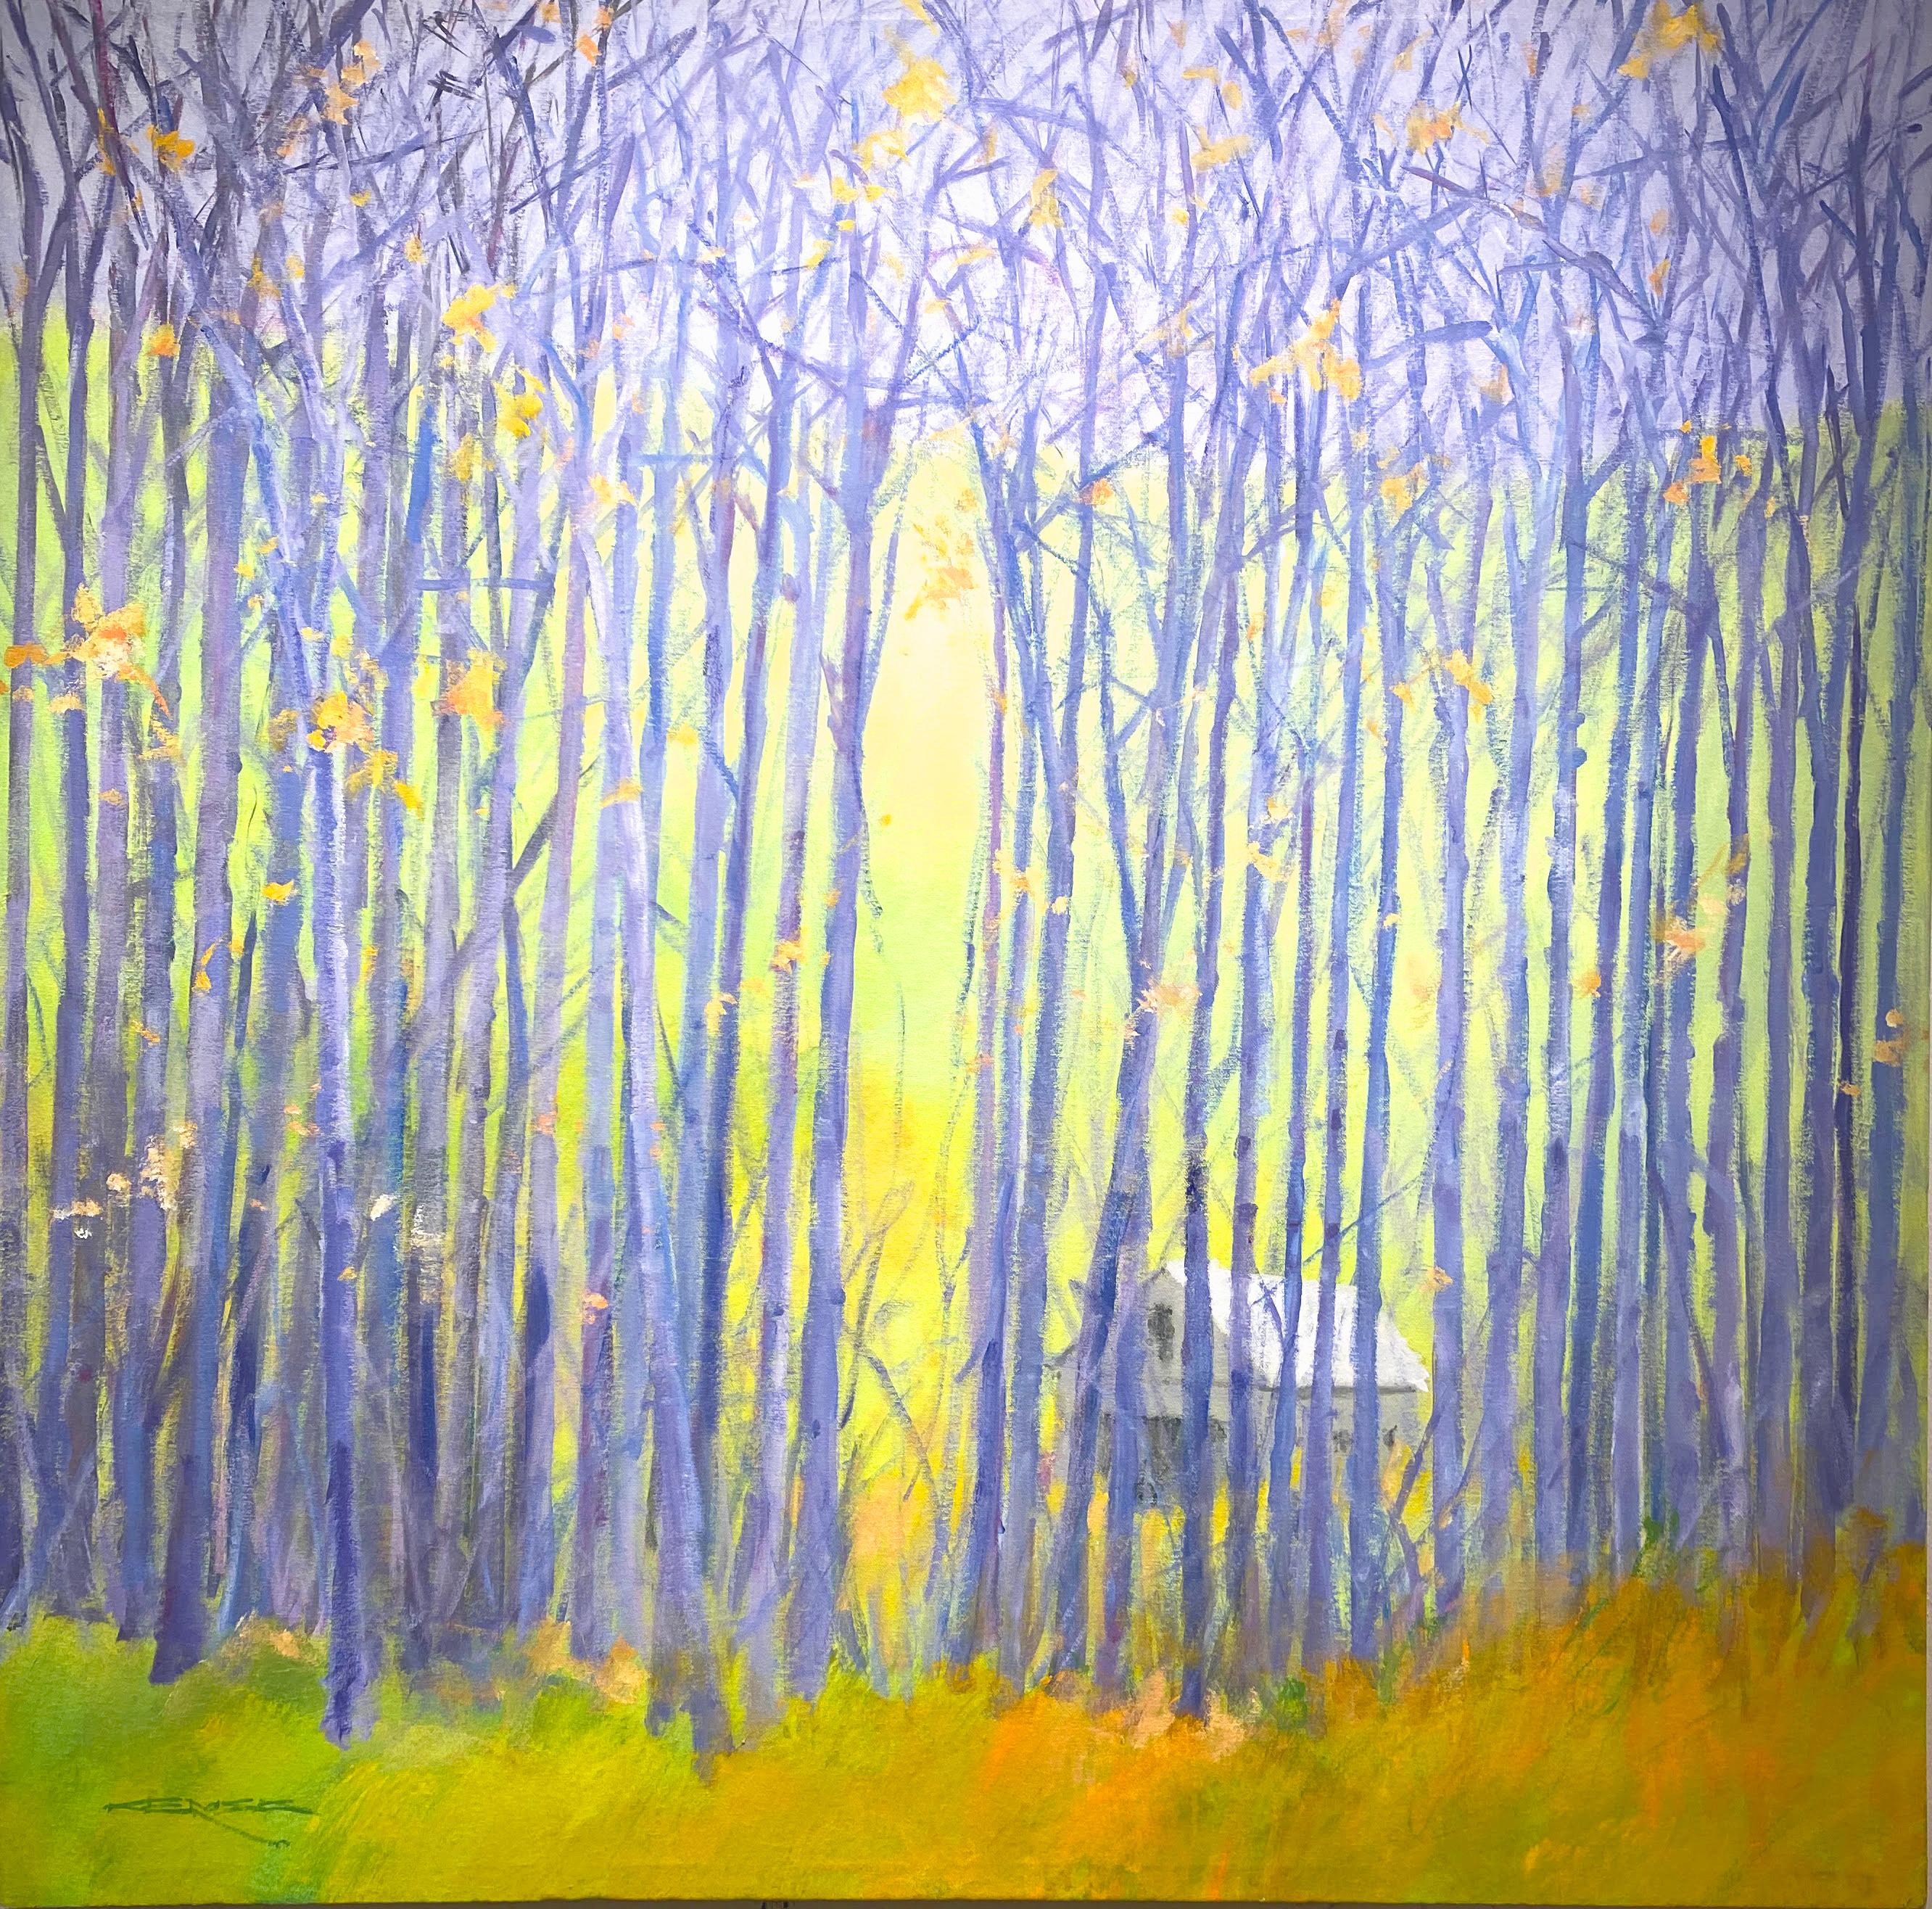 Charles Emery Ross Landscape Painting - C.E. Ross, "Hidden Forest", Colorful Abstract Forest Landscape Acrylic on Canvas